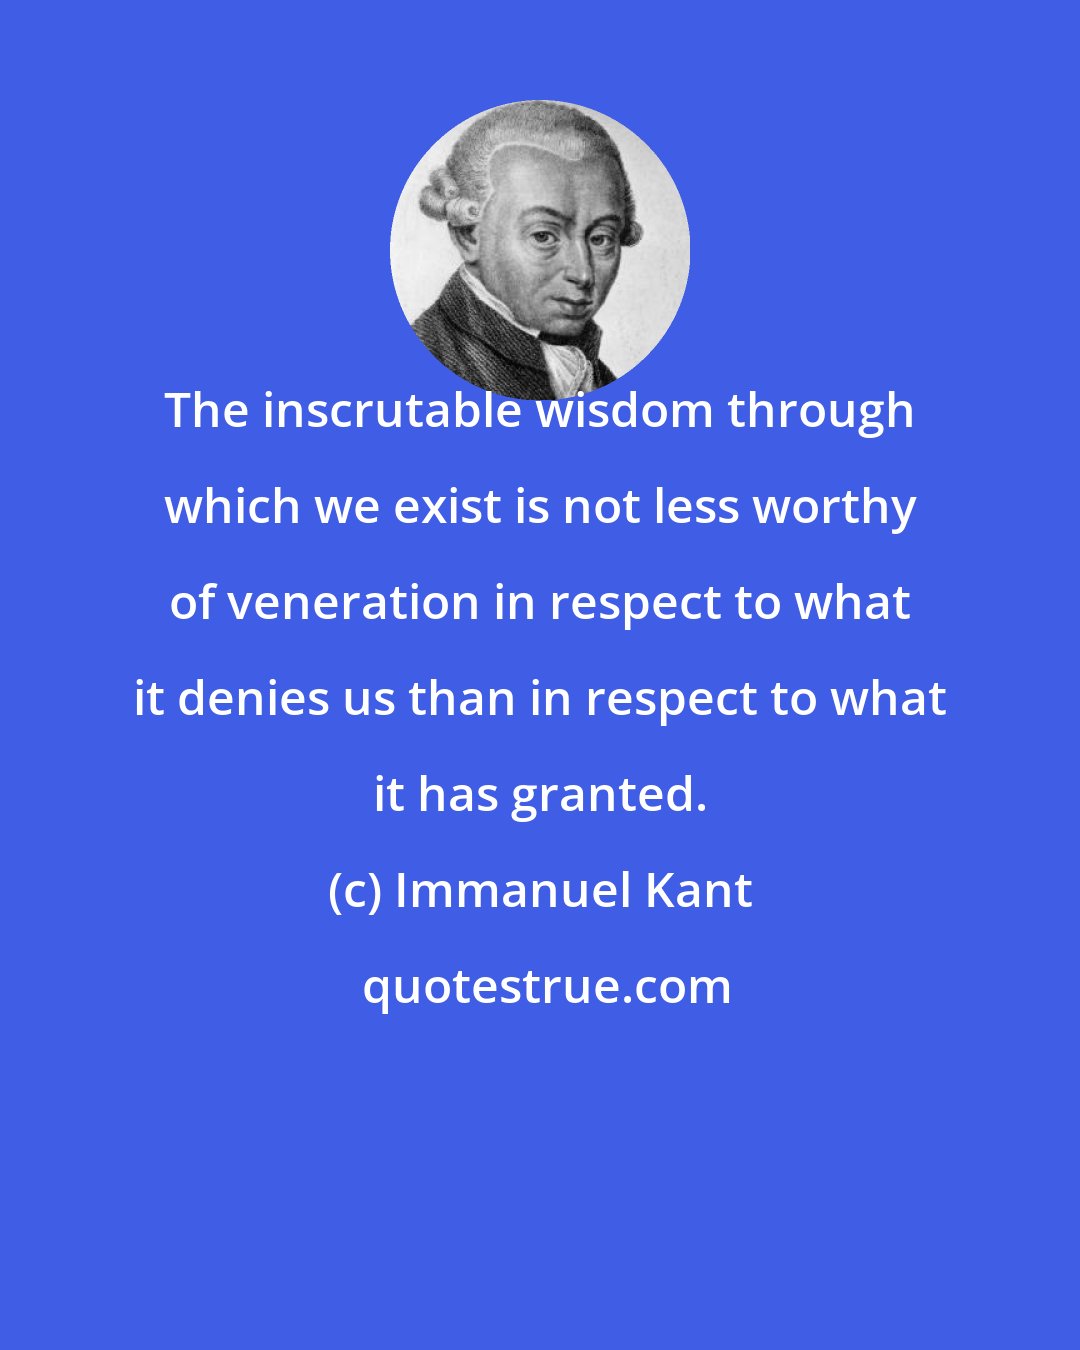 Immanuel Kant: The inscrutable wisdom through which we exist is not less worthy of veneration in respect to what it denies us than in respect to what it has granted.